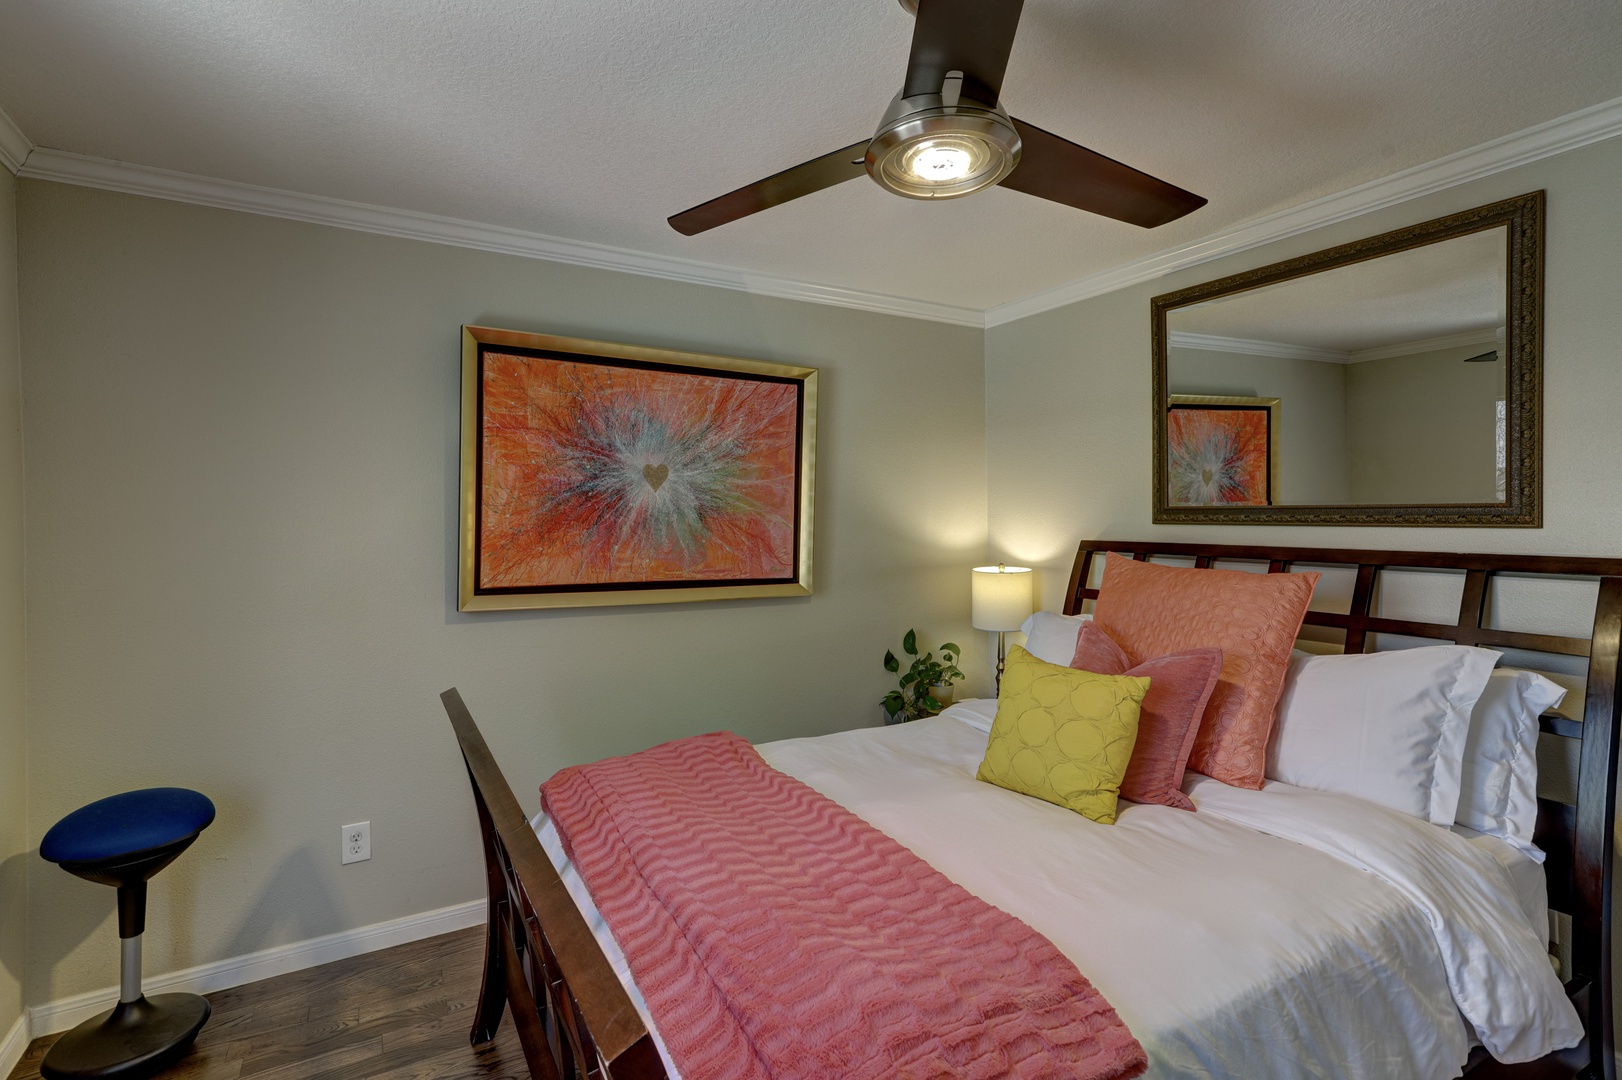 A cozy queen bed & ample natural light await in this bedroom retreat